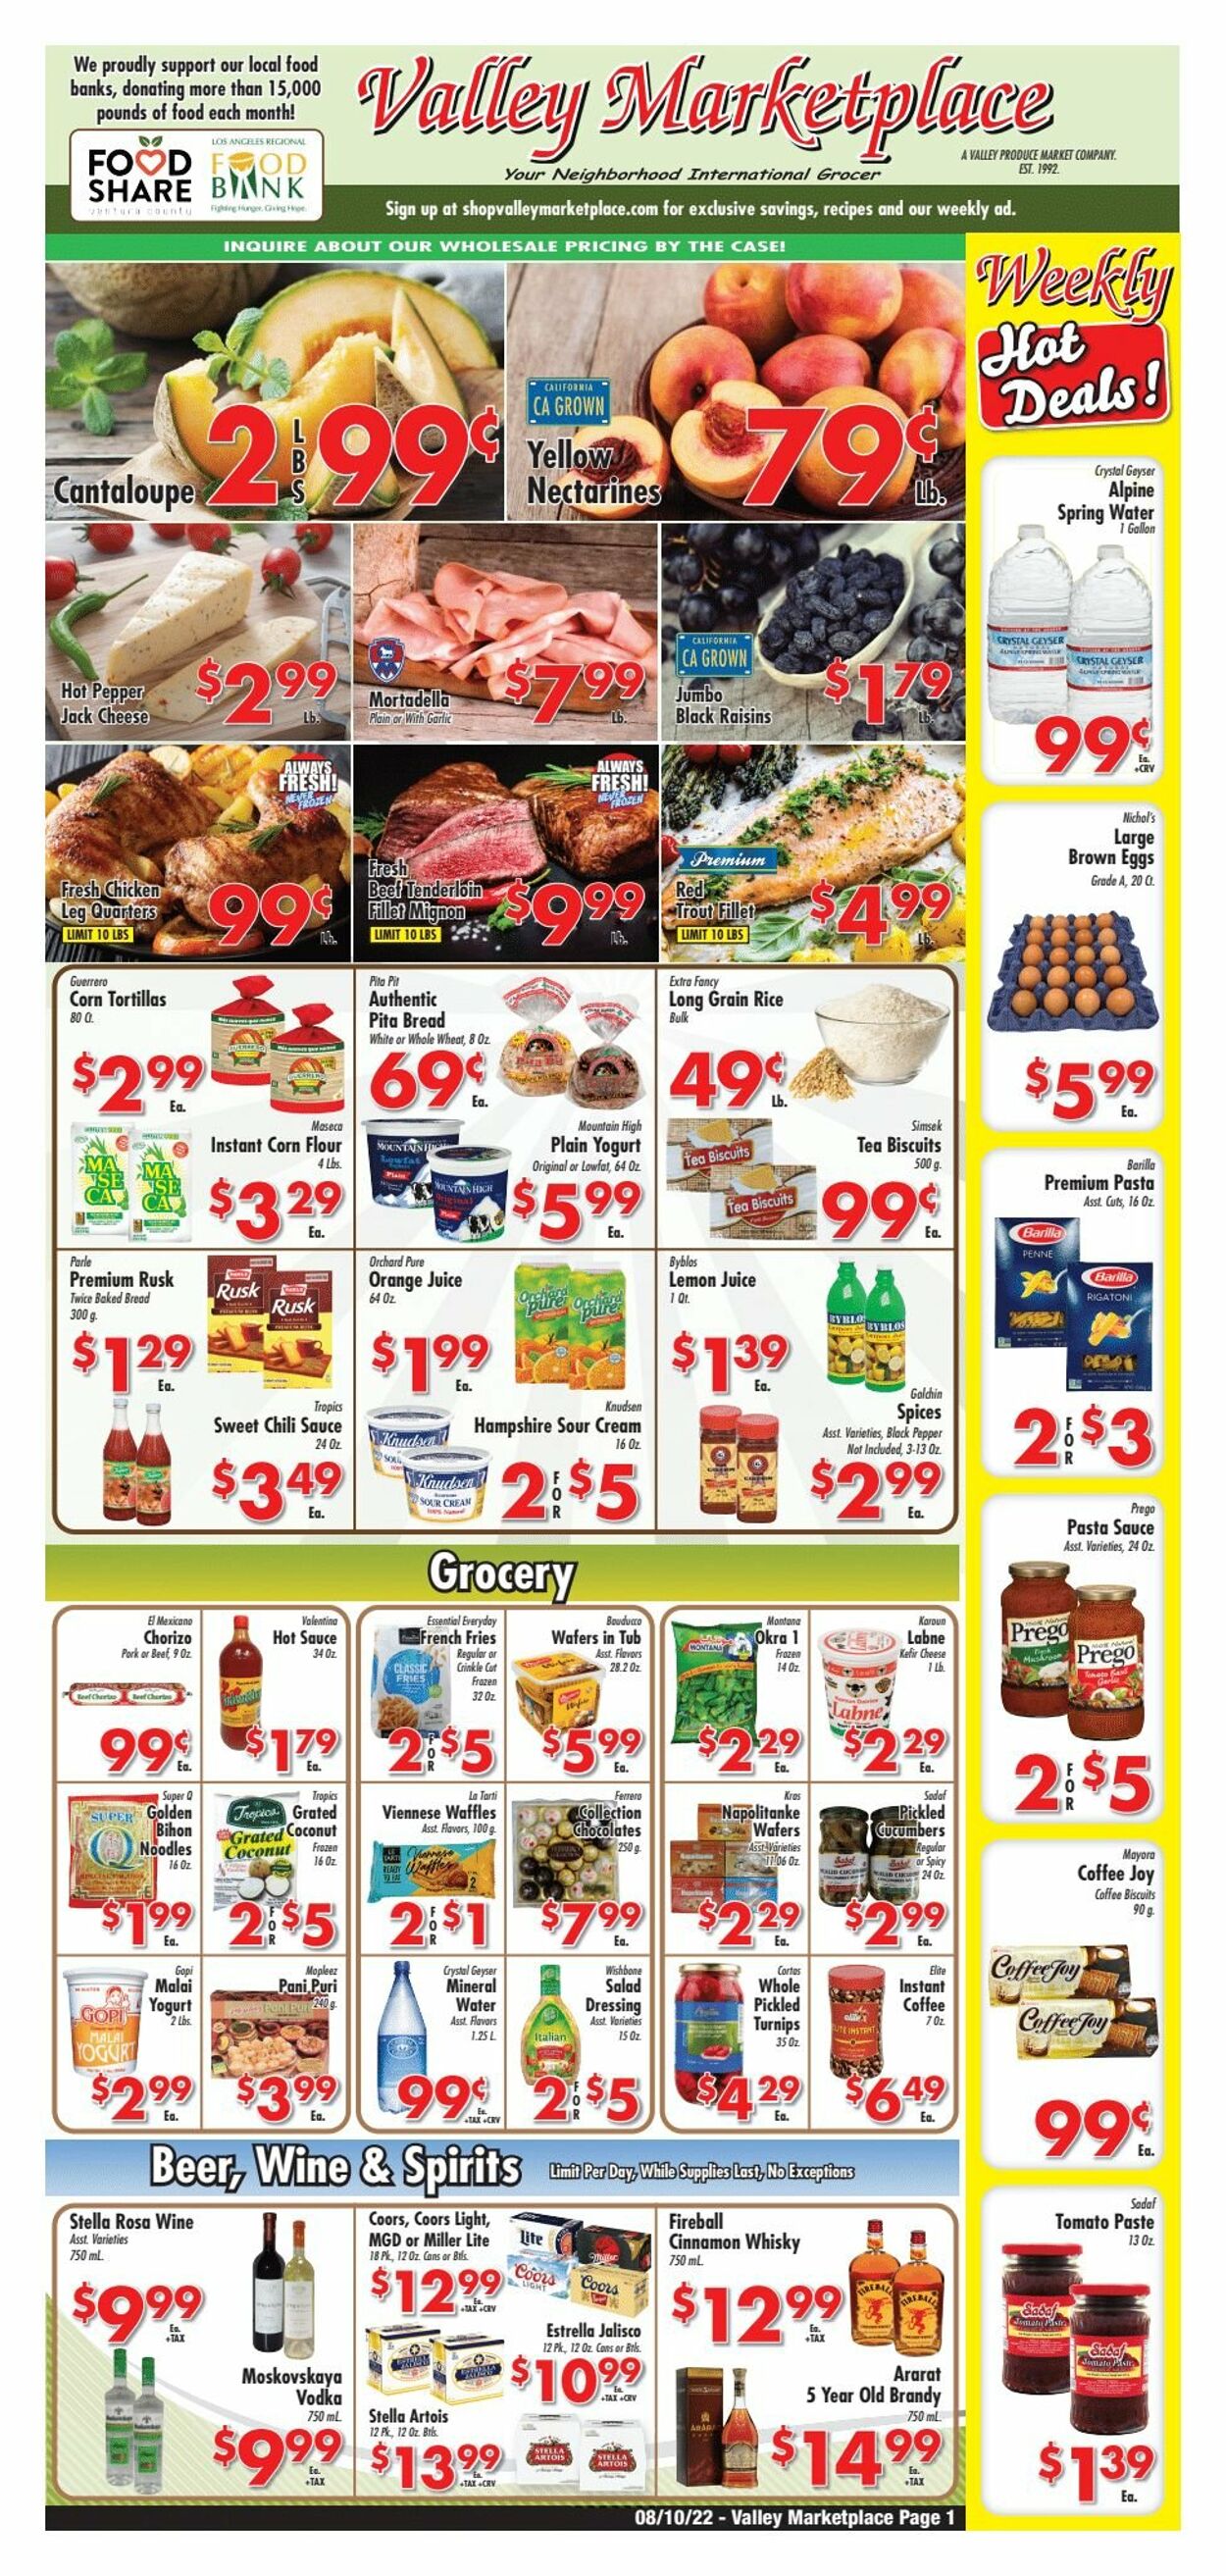 Weekly ad Valley Marketplace 08/10/2022-08/16/2022